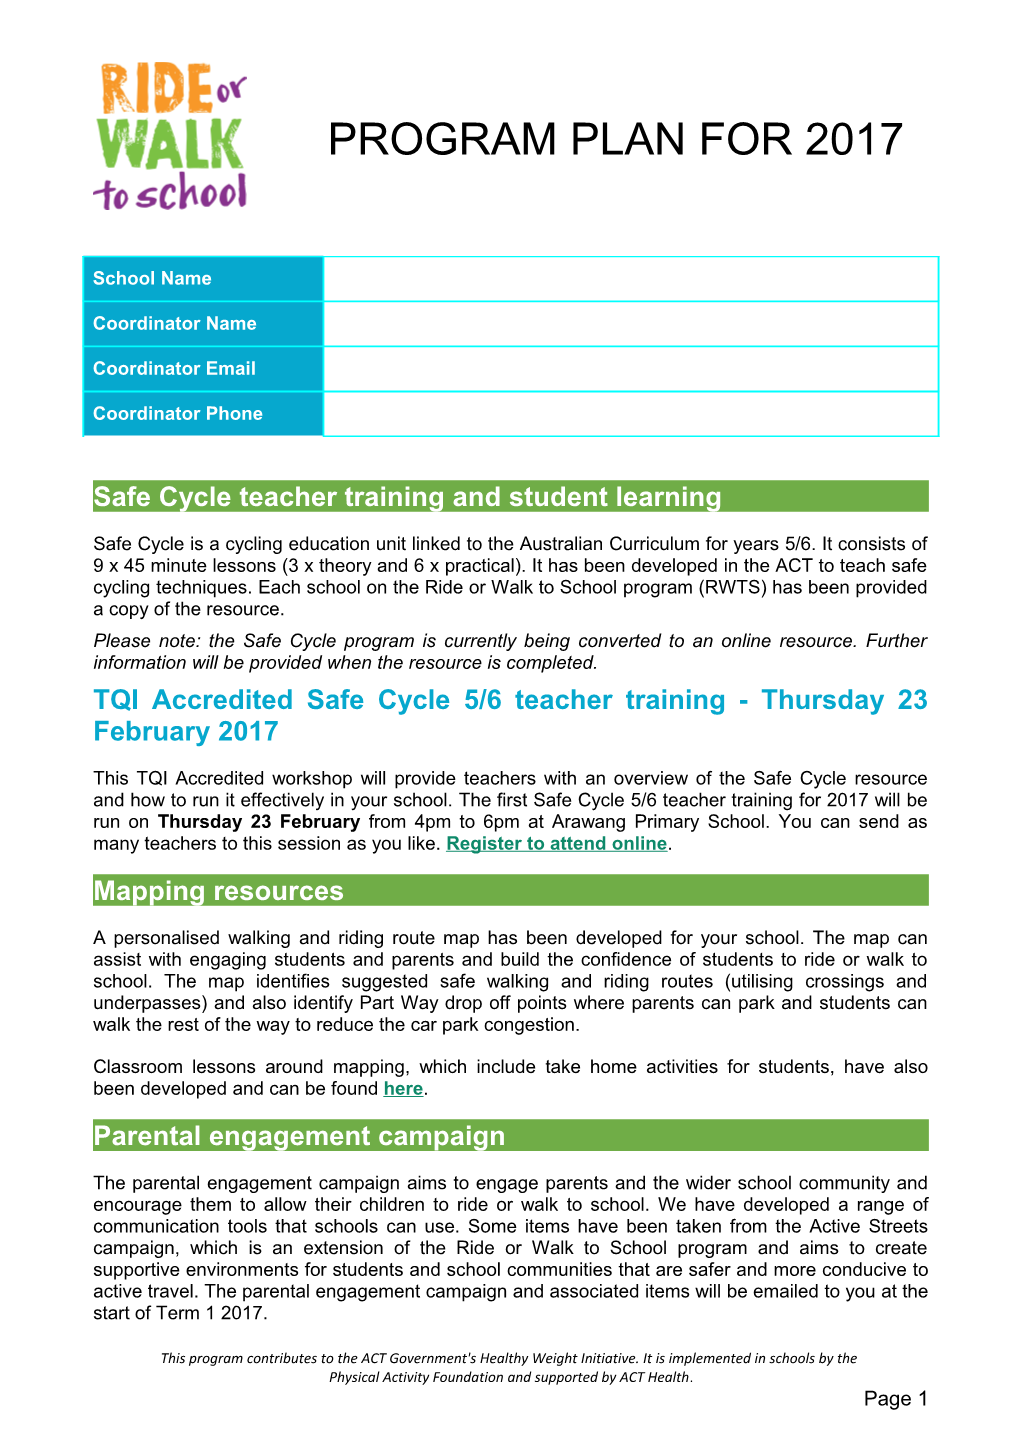 Safe Cycle Teacher Training and Student Learning